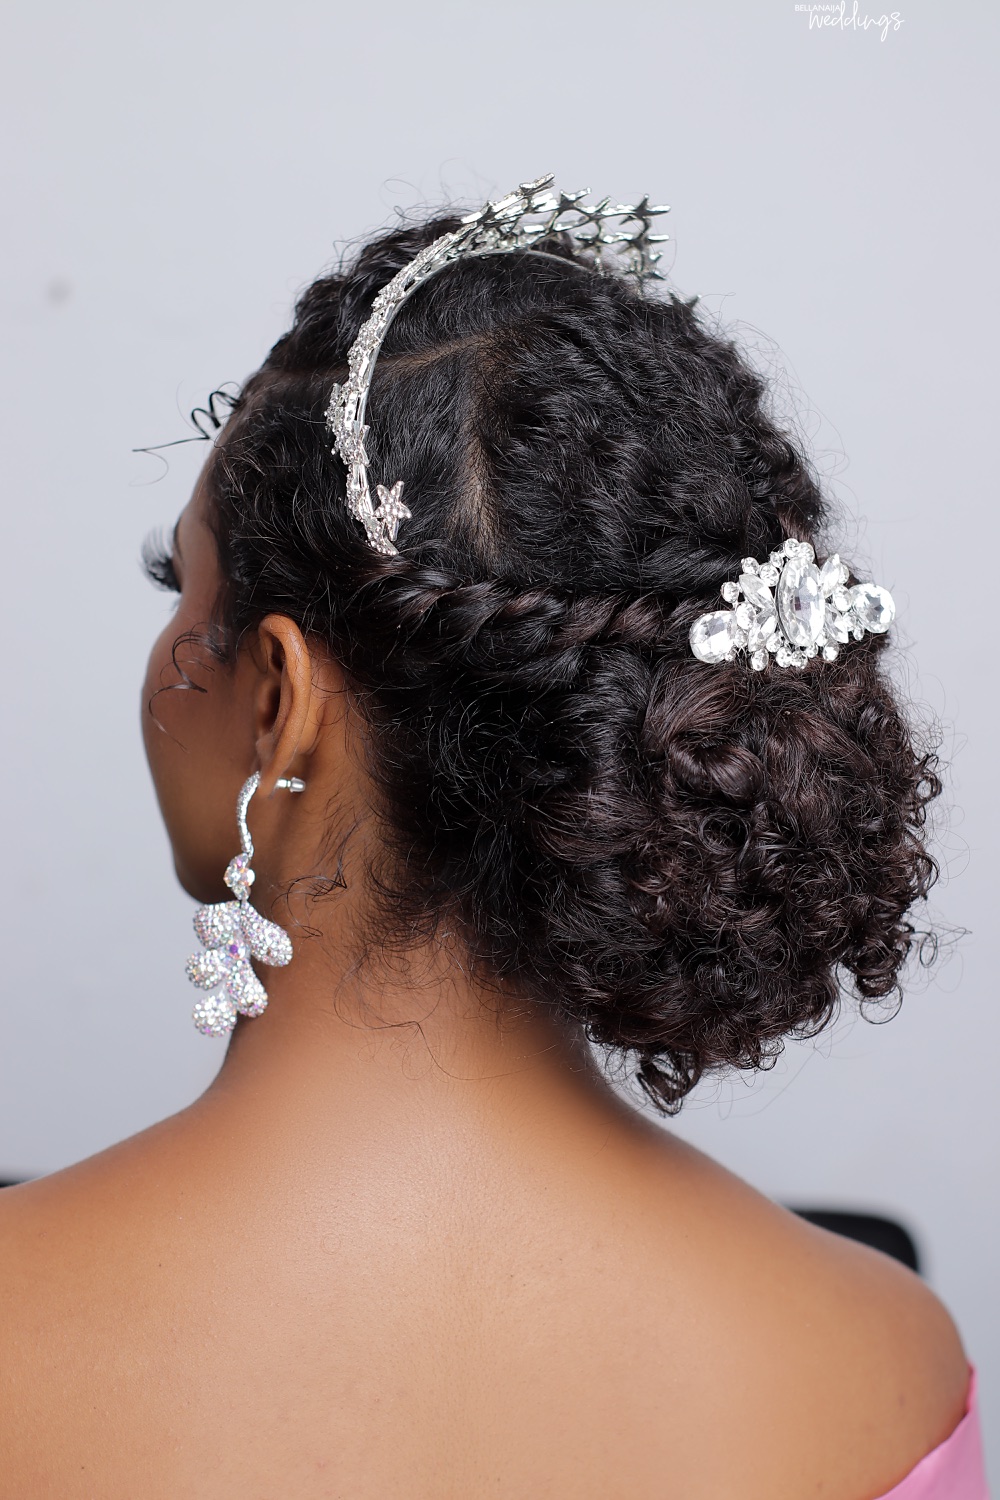 Thinking of How to Style Your Bridal Hair? Didi Richards has 5 Tips to Help